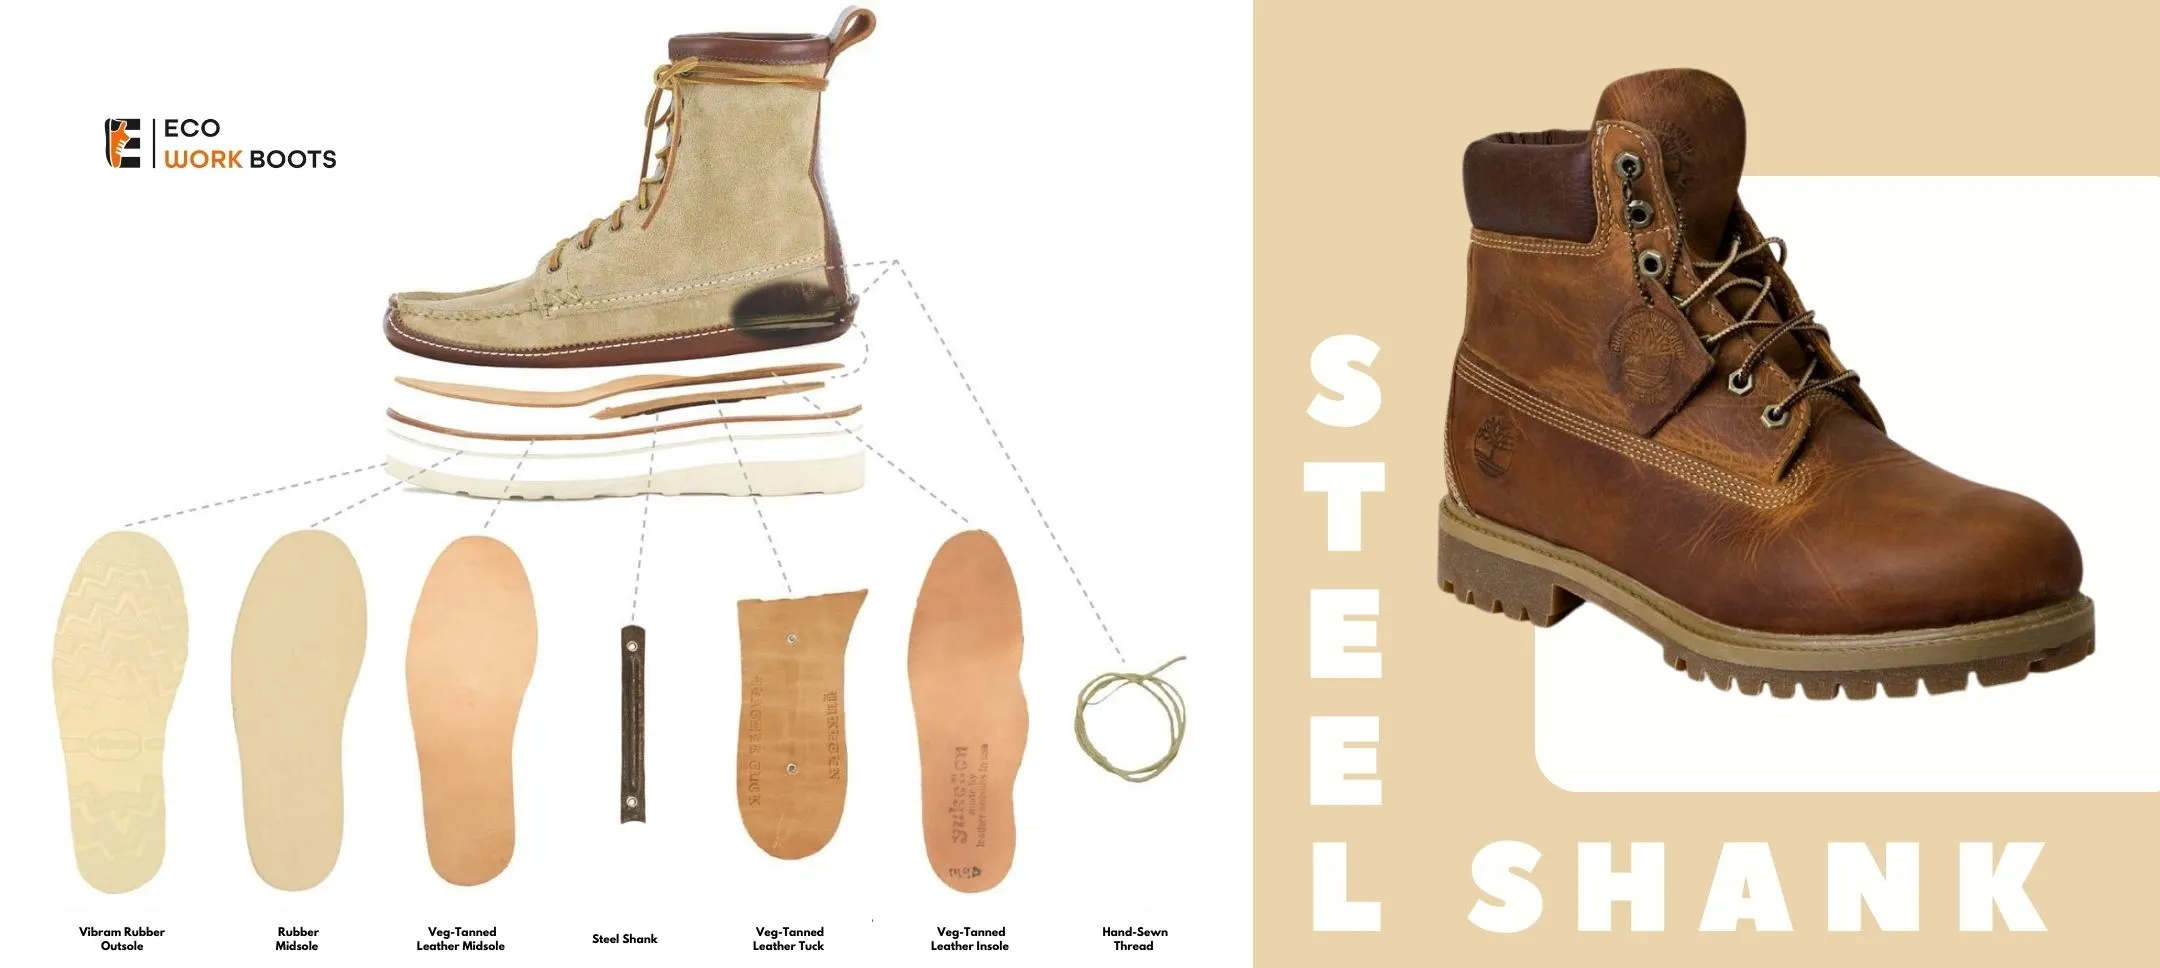 How to Hide Shoelaces - 5 Steps by Eco Work Boots